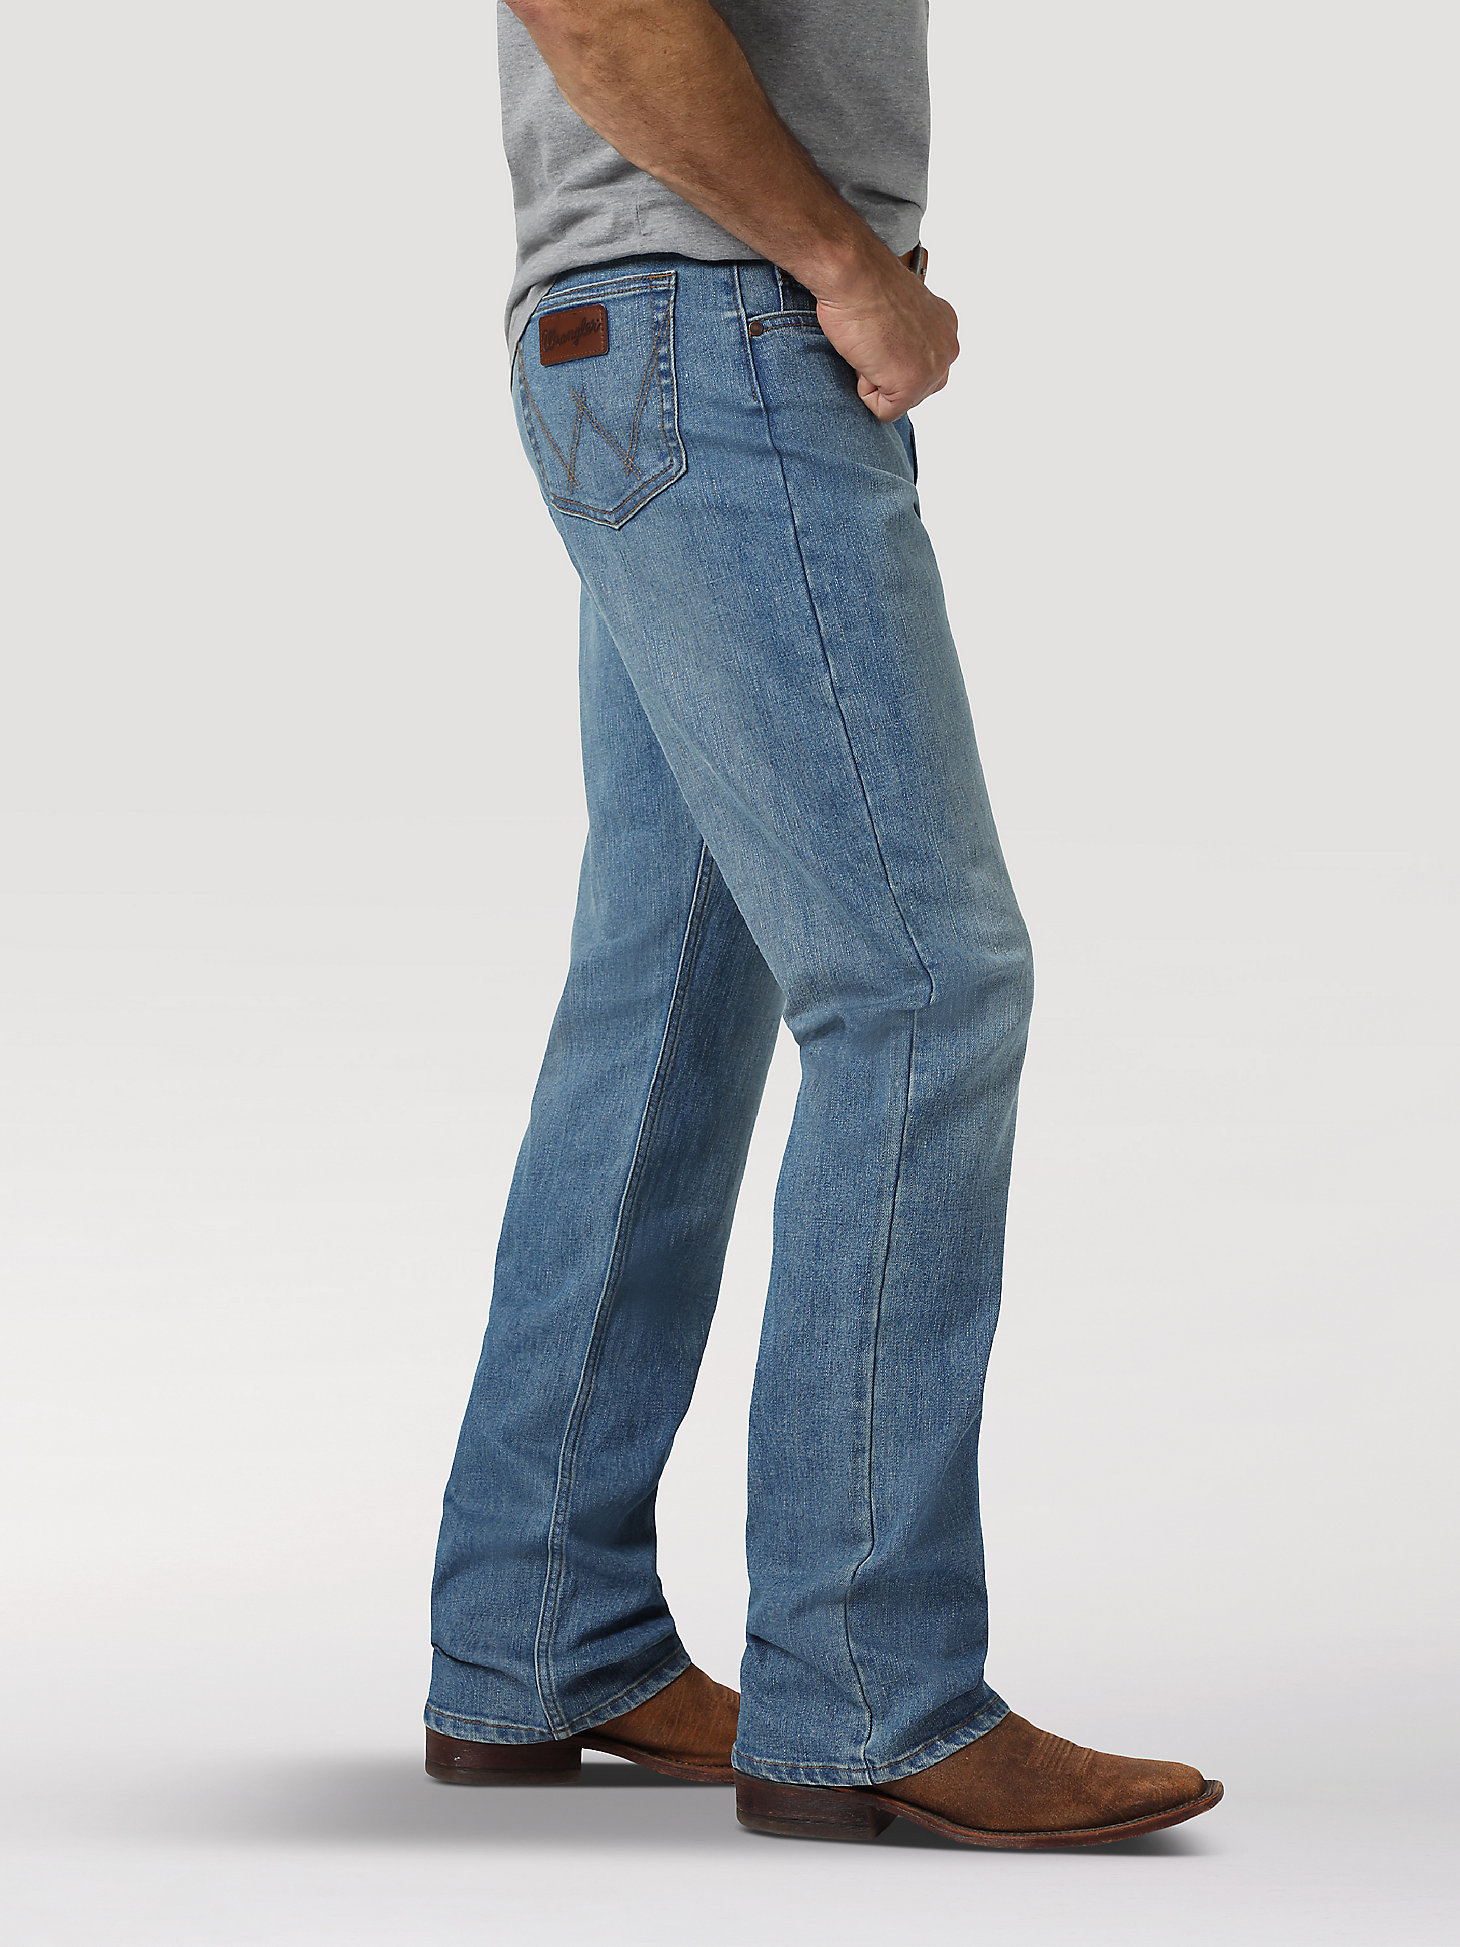 Men's Wrangler® 20X® Active Flex Relaxed Fit Jean in Blue Mountain alternative view 1